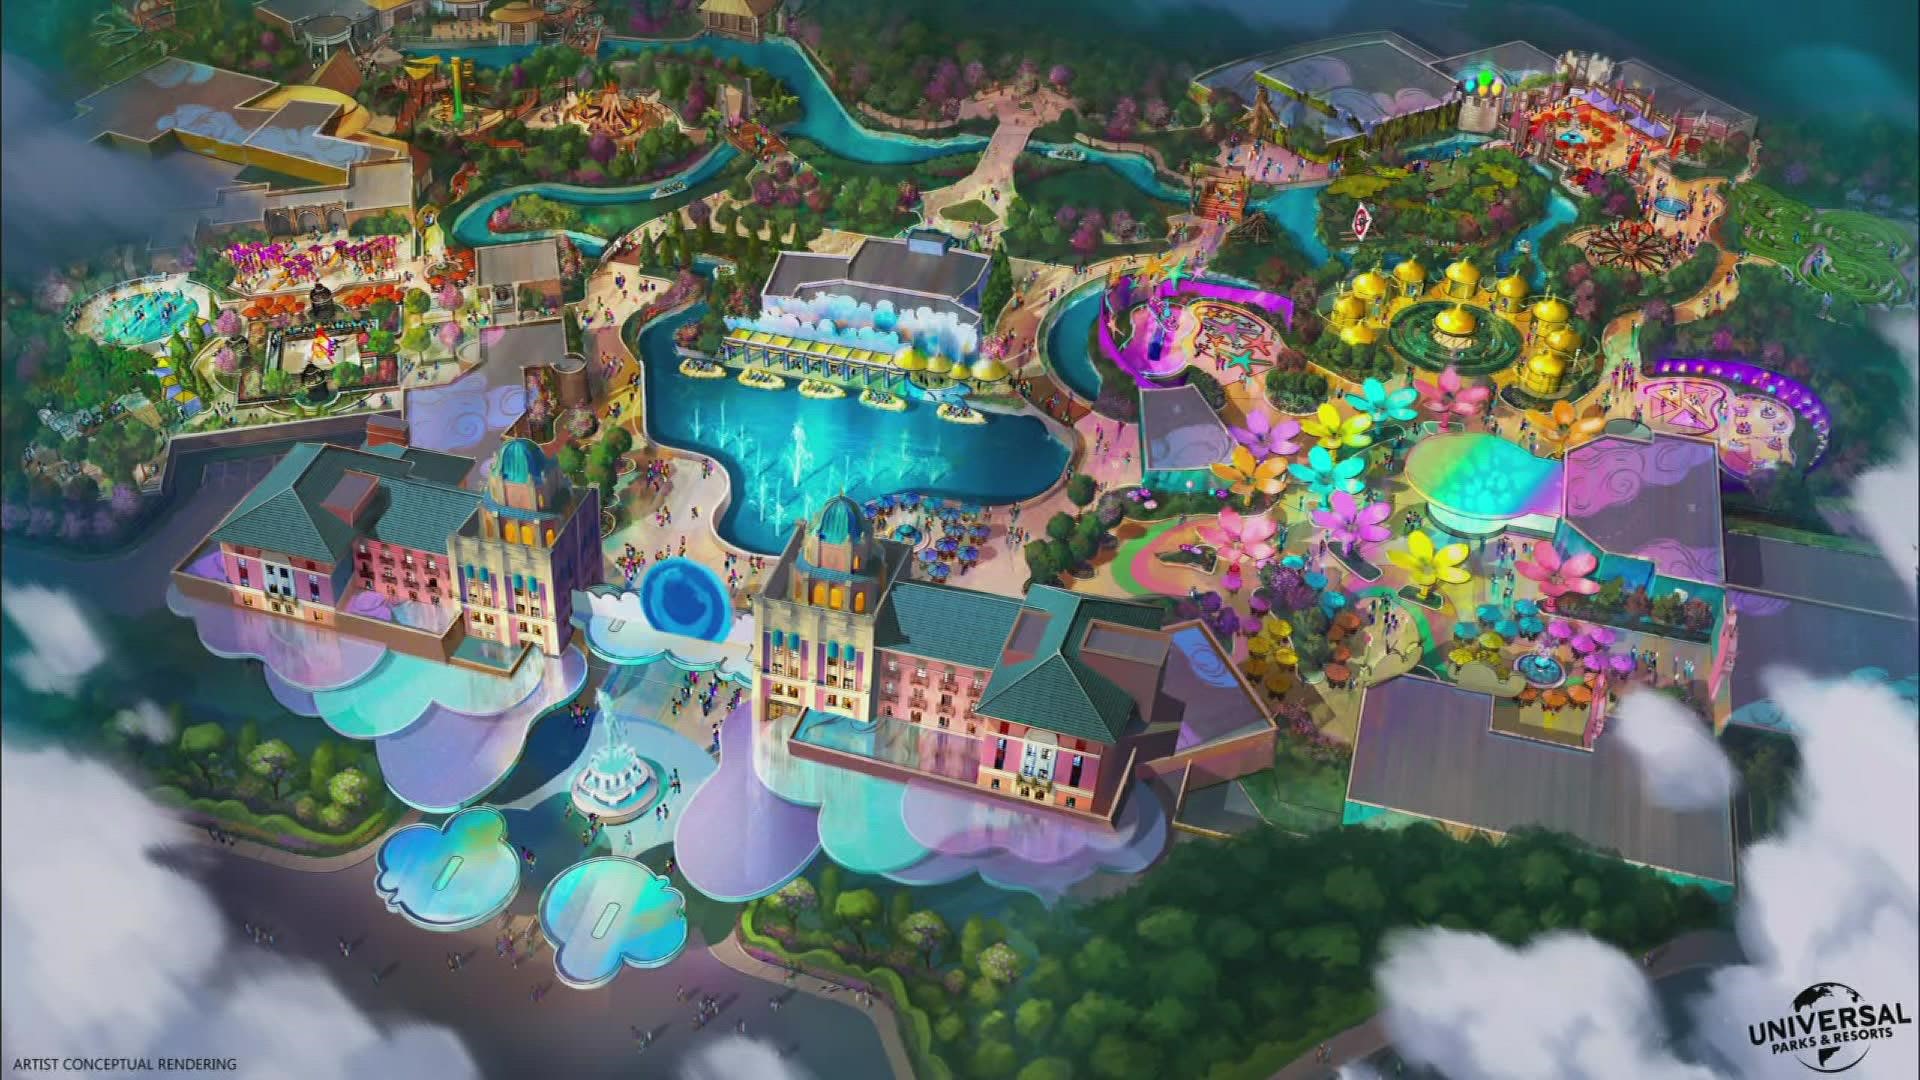 The park will be a kids-themed park with immersive experiences and rides involving Universal movies, leaders said.